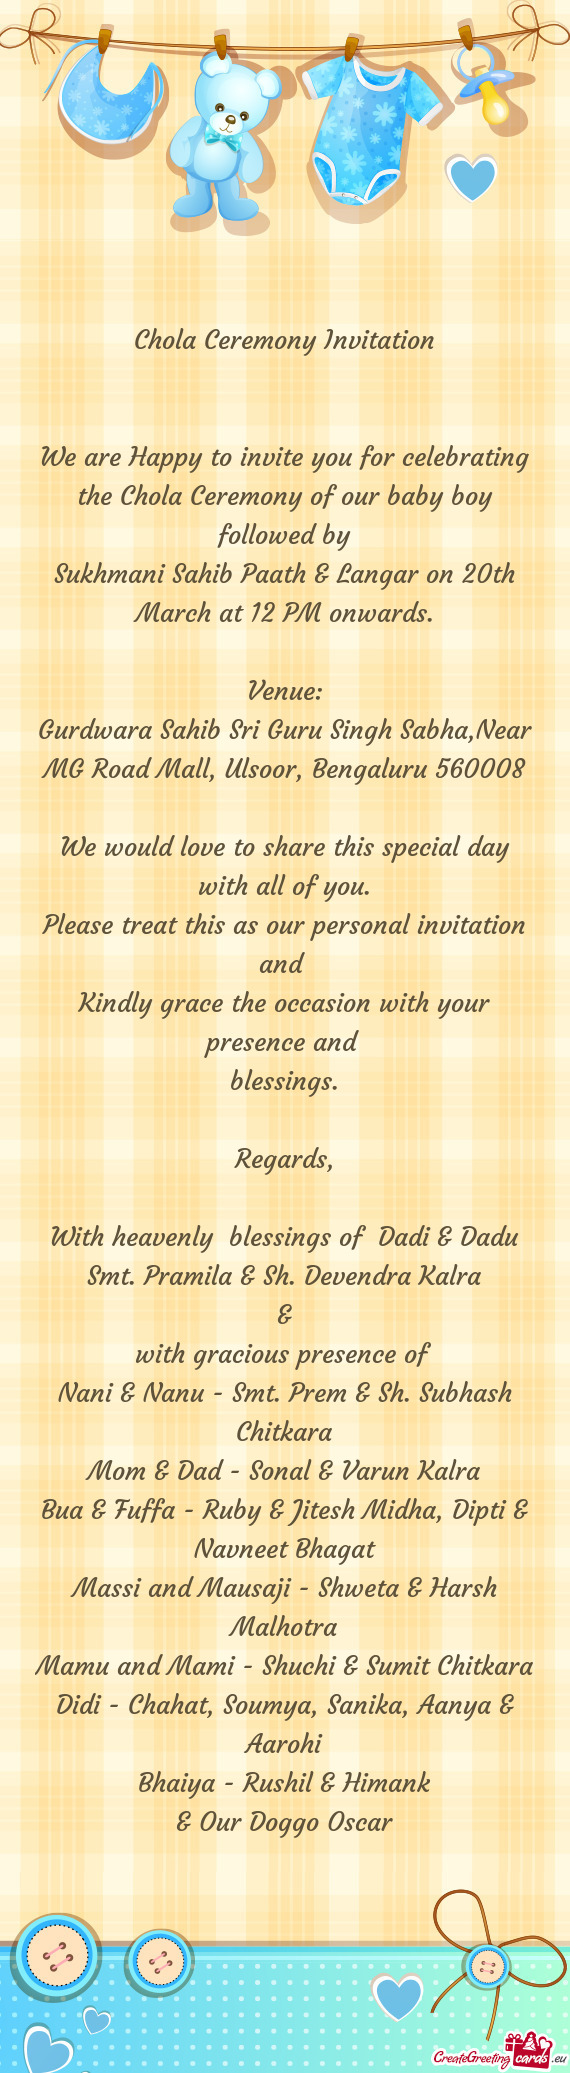 We are Happy to invite you for celebrating the Chola Ceremony of our baby boy followed by